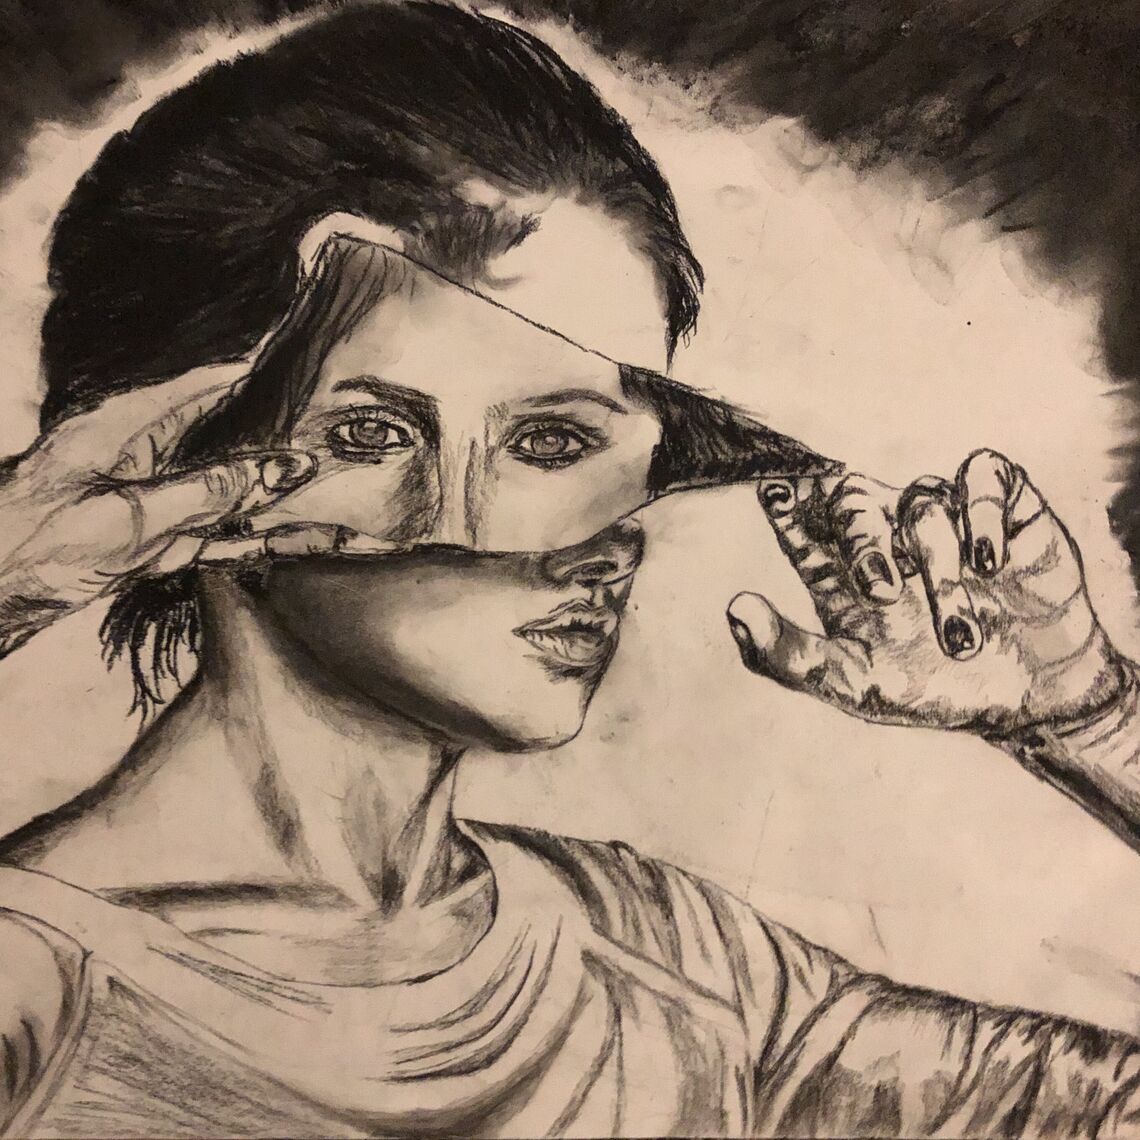 Charcoal illustrations by Jevelson Jean ’21